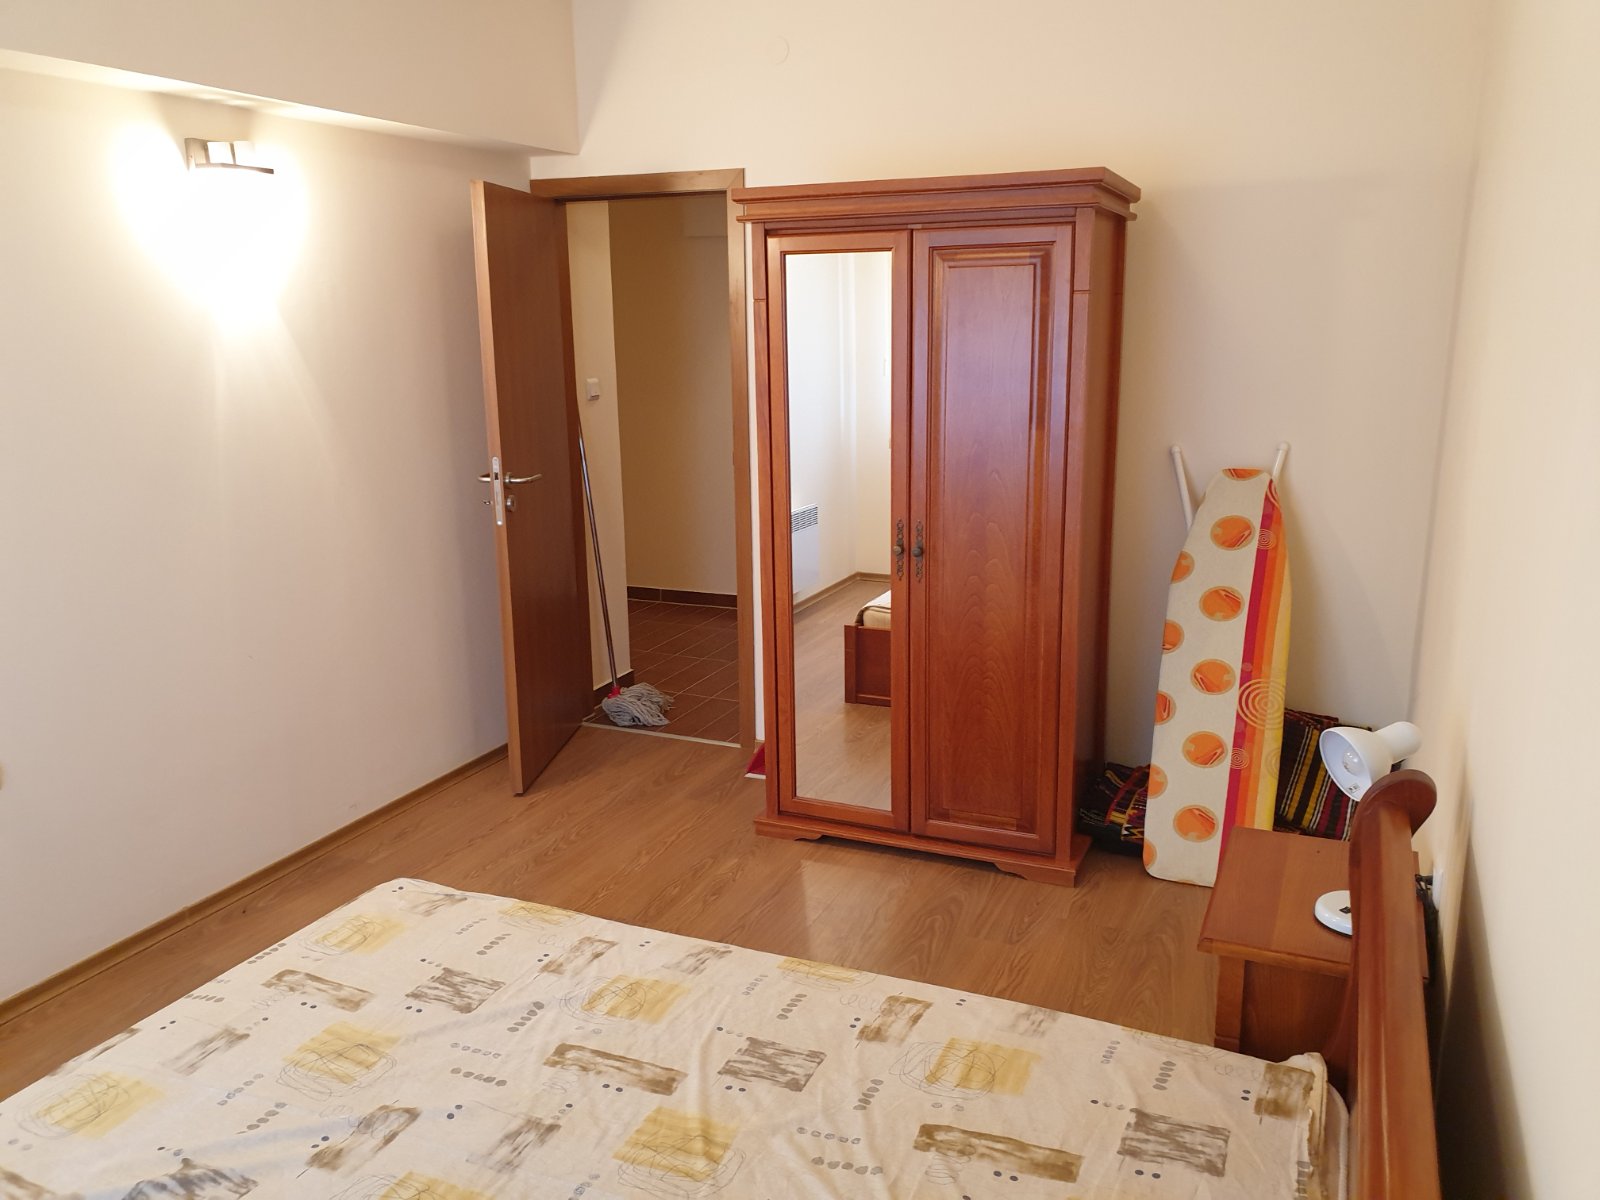 sunny one-bedroom apartment 5 minutes from the ski lift in bansko